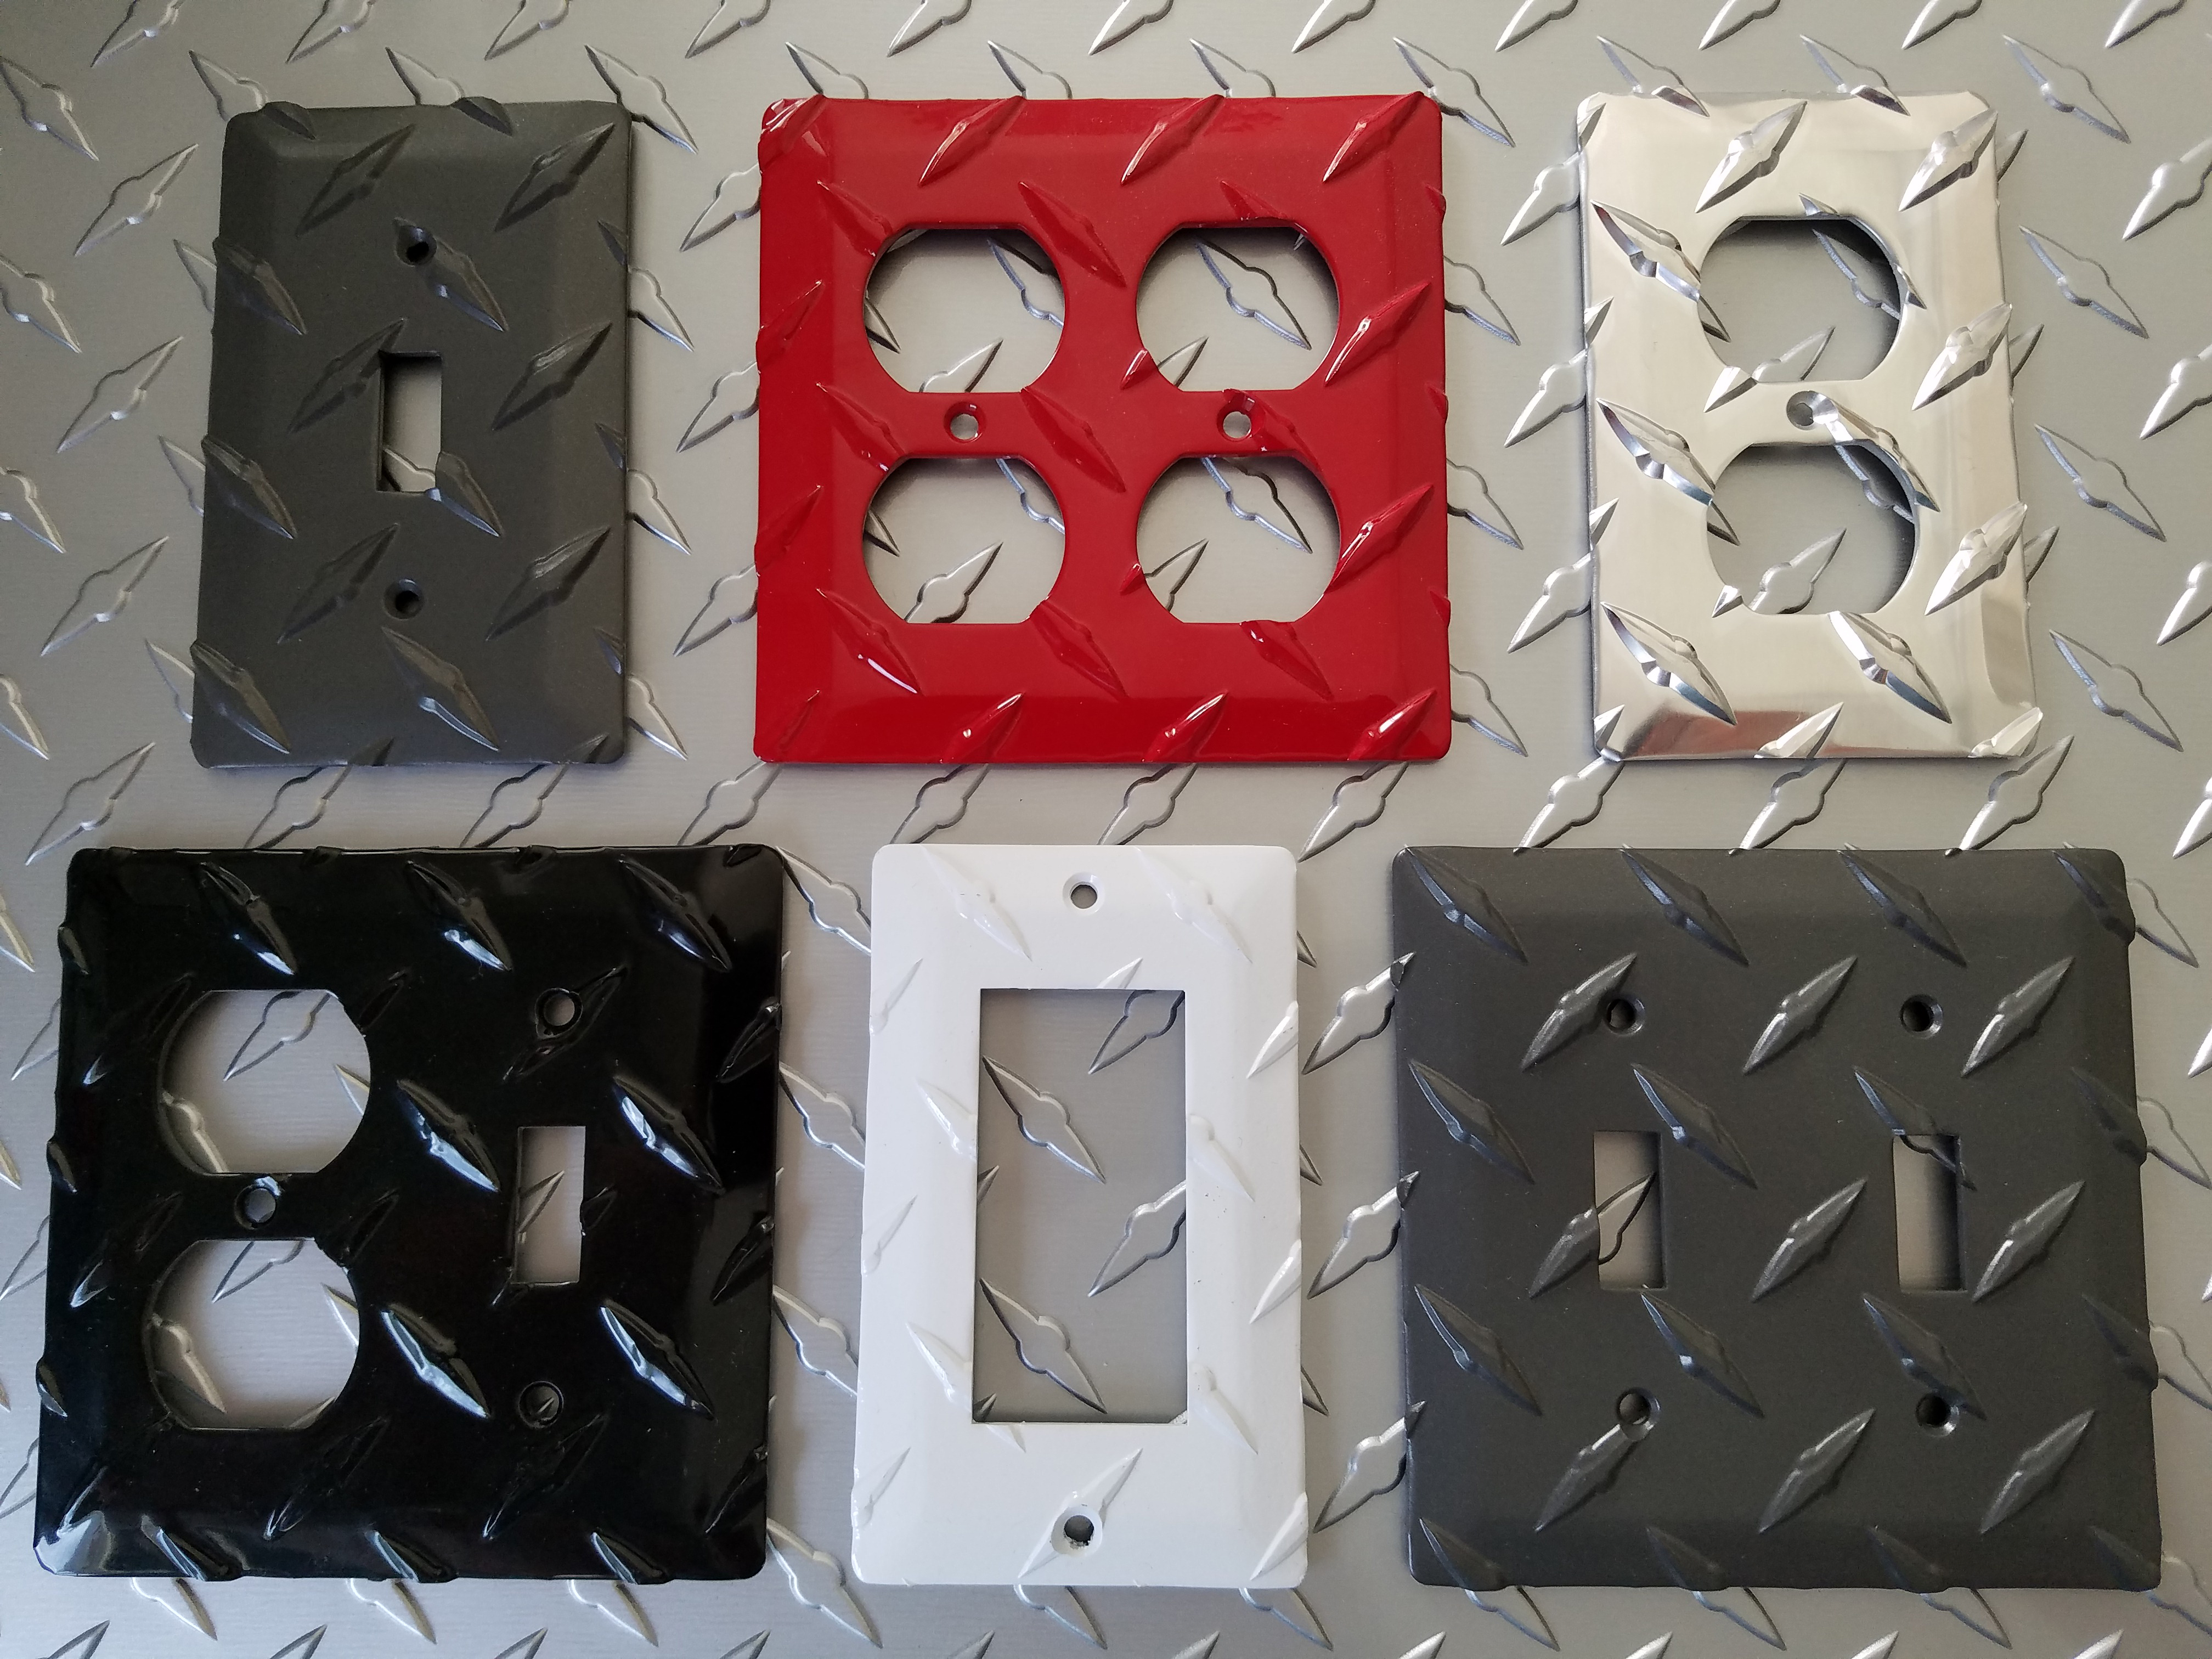 Colored diamond plate switch plates and outlet covers from CutsMetal.